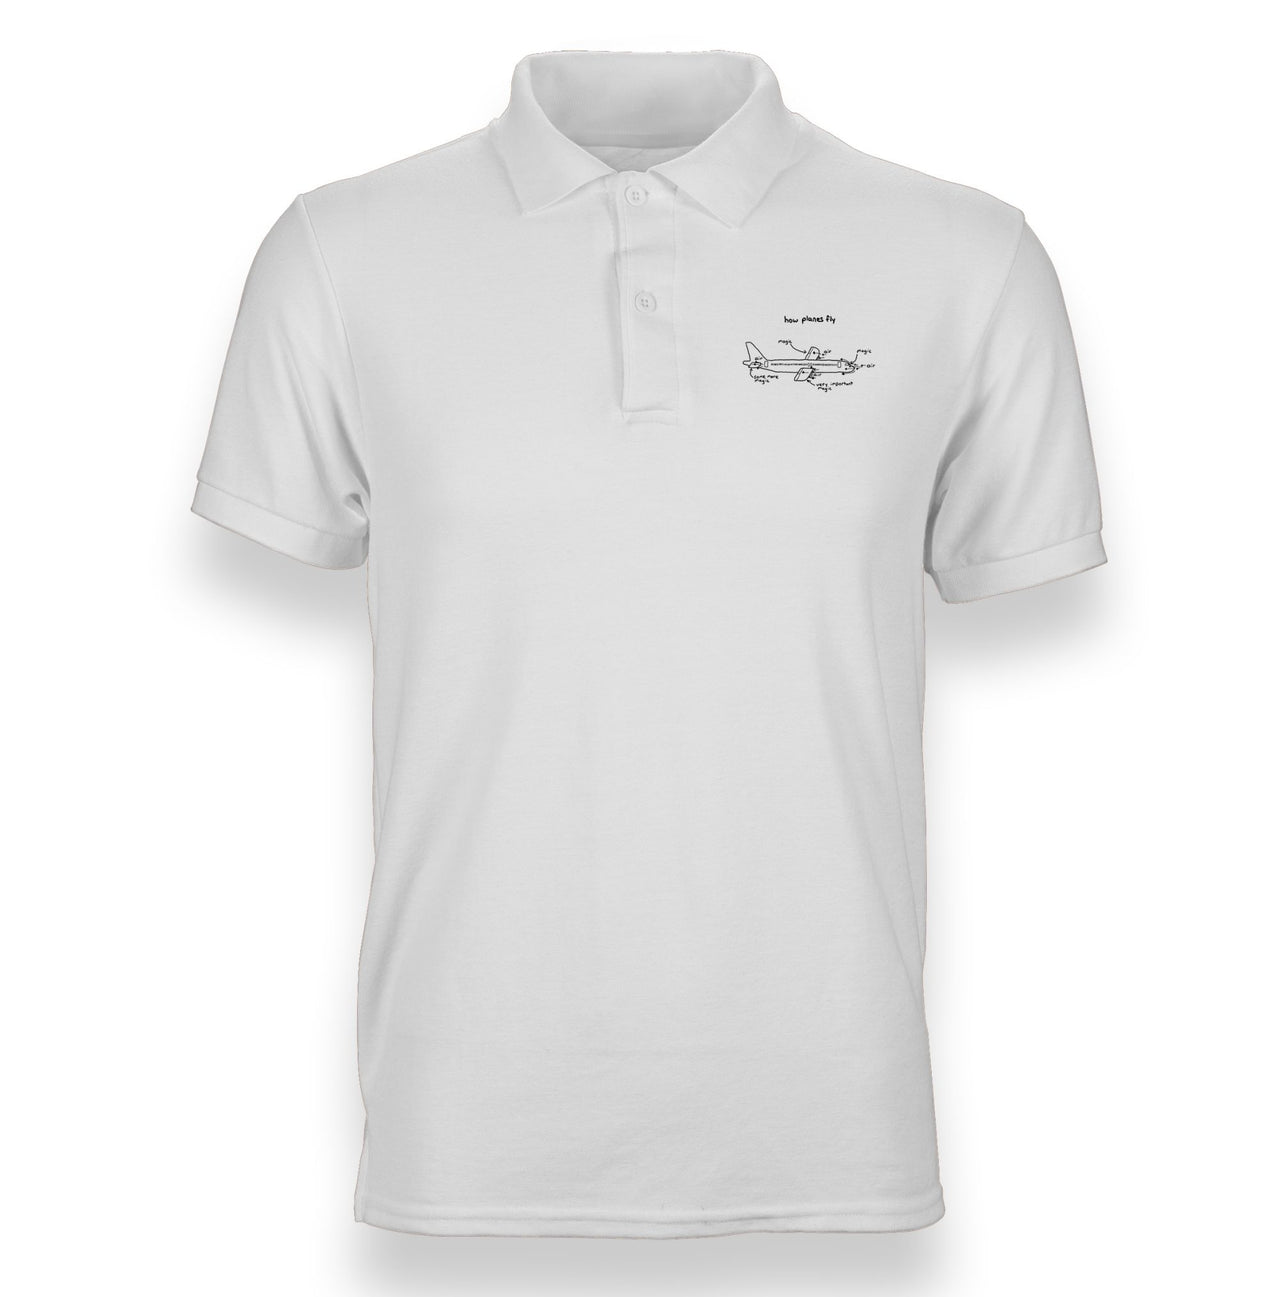 How Planes Fly Designed "WOMEN" Polo T-Shirts